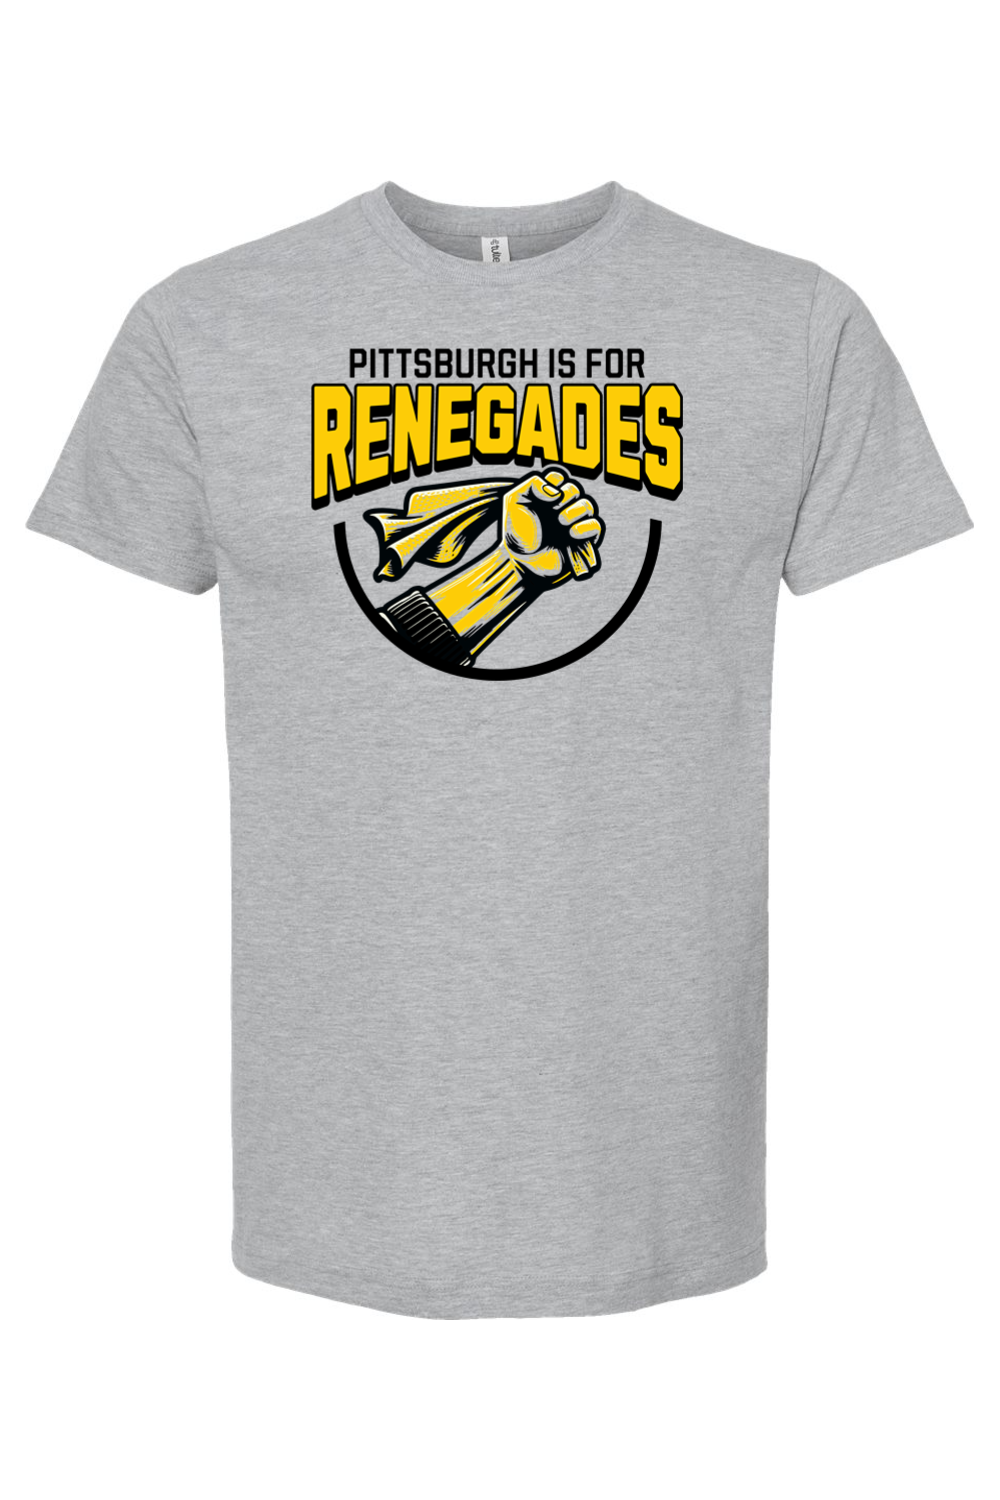 Pittsburgh is for Renegades - Yinzylvania